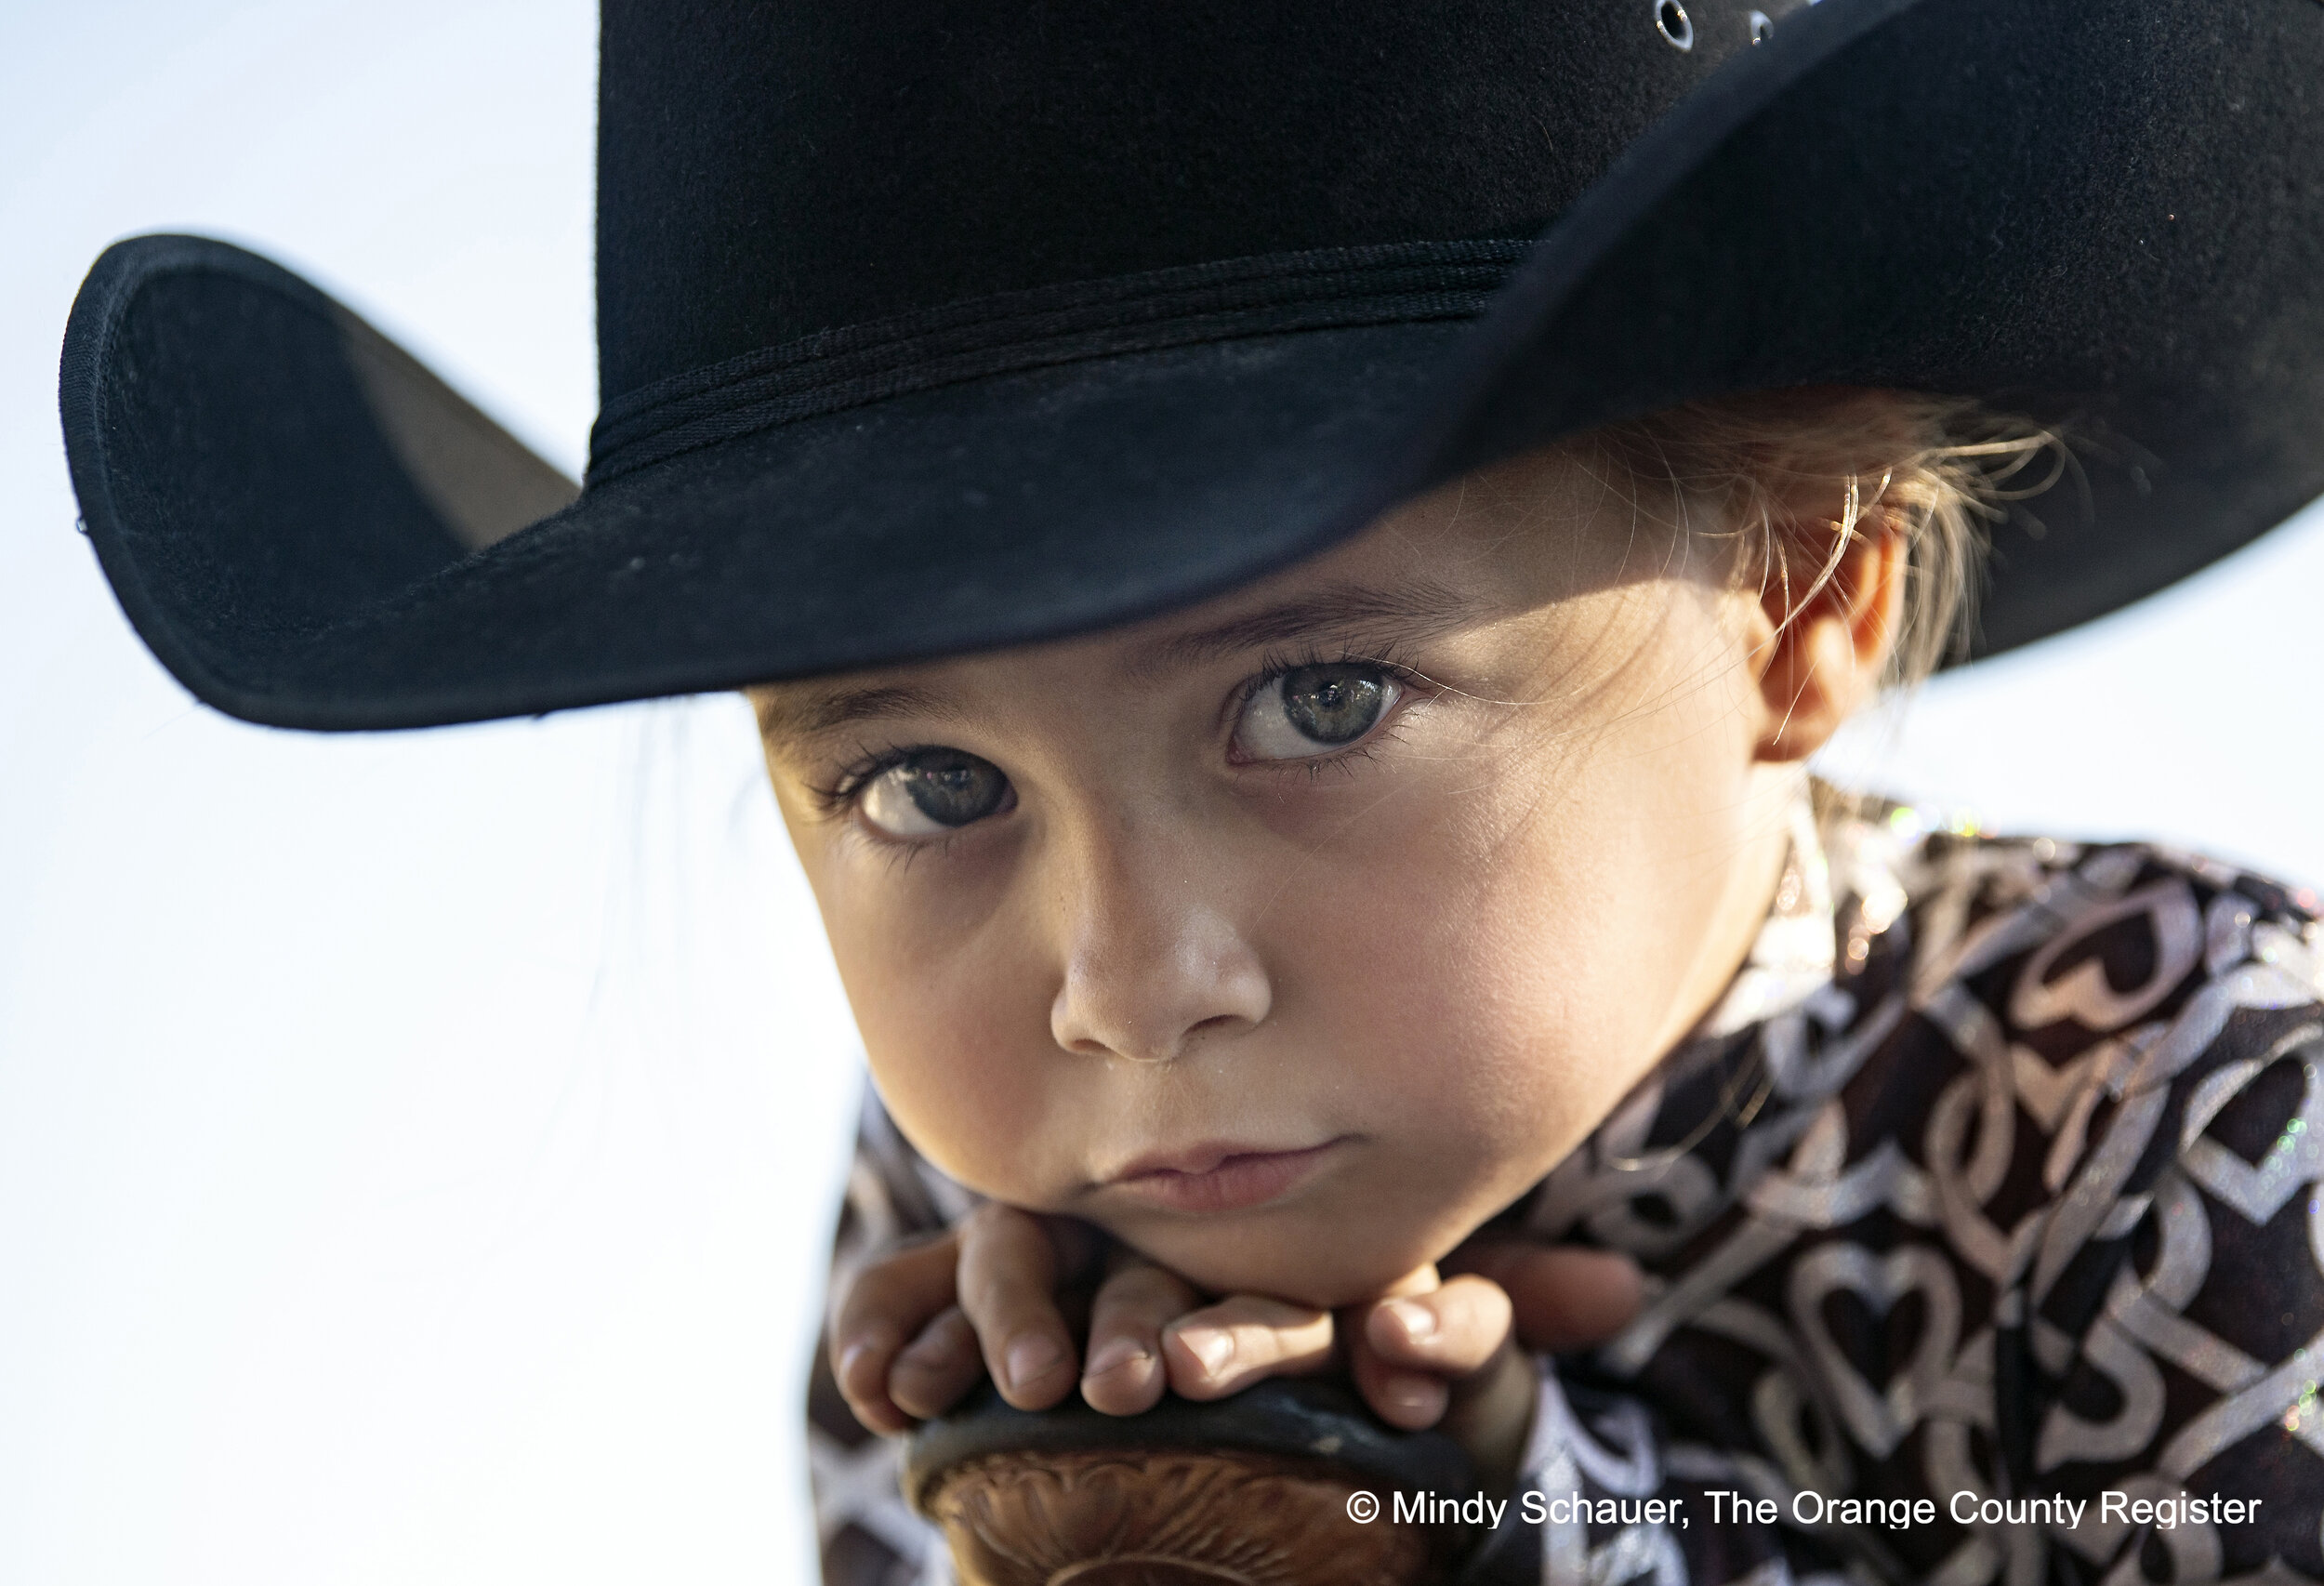  Three-year-old Brielle waits to compete in the Yorba Linda Country Riders 50th Anniversary Show on Sunday, November 15, 2020. She and her horse, Cookie, took second place in the lead line trail competition. (Photo by Mindy Schauer, Orange County Reg